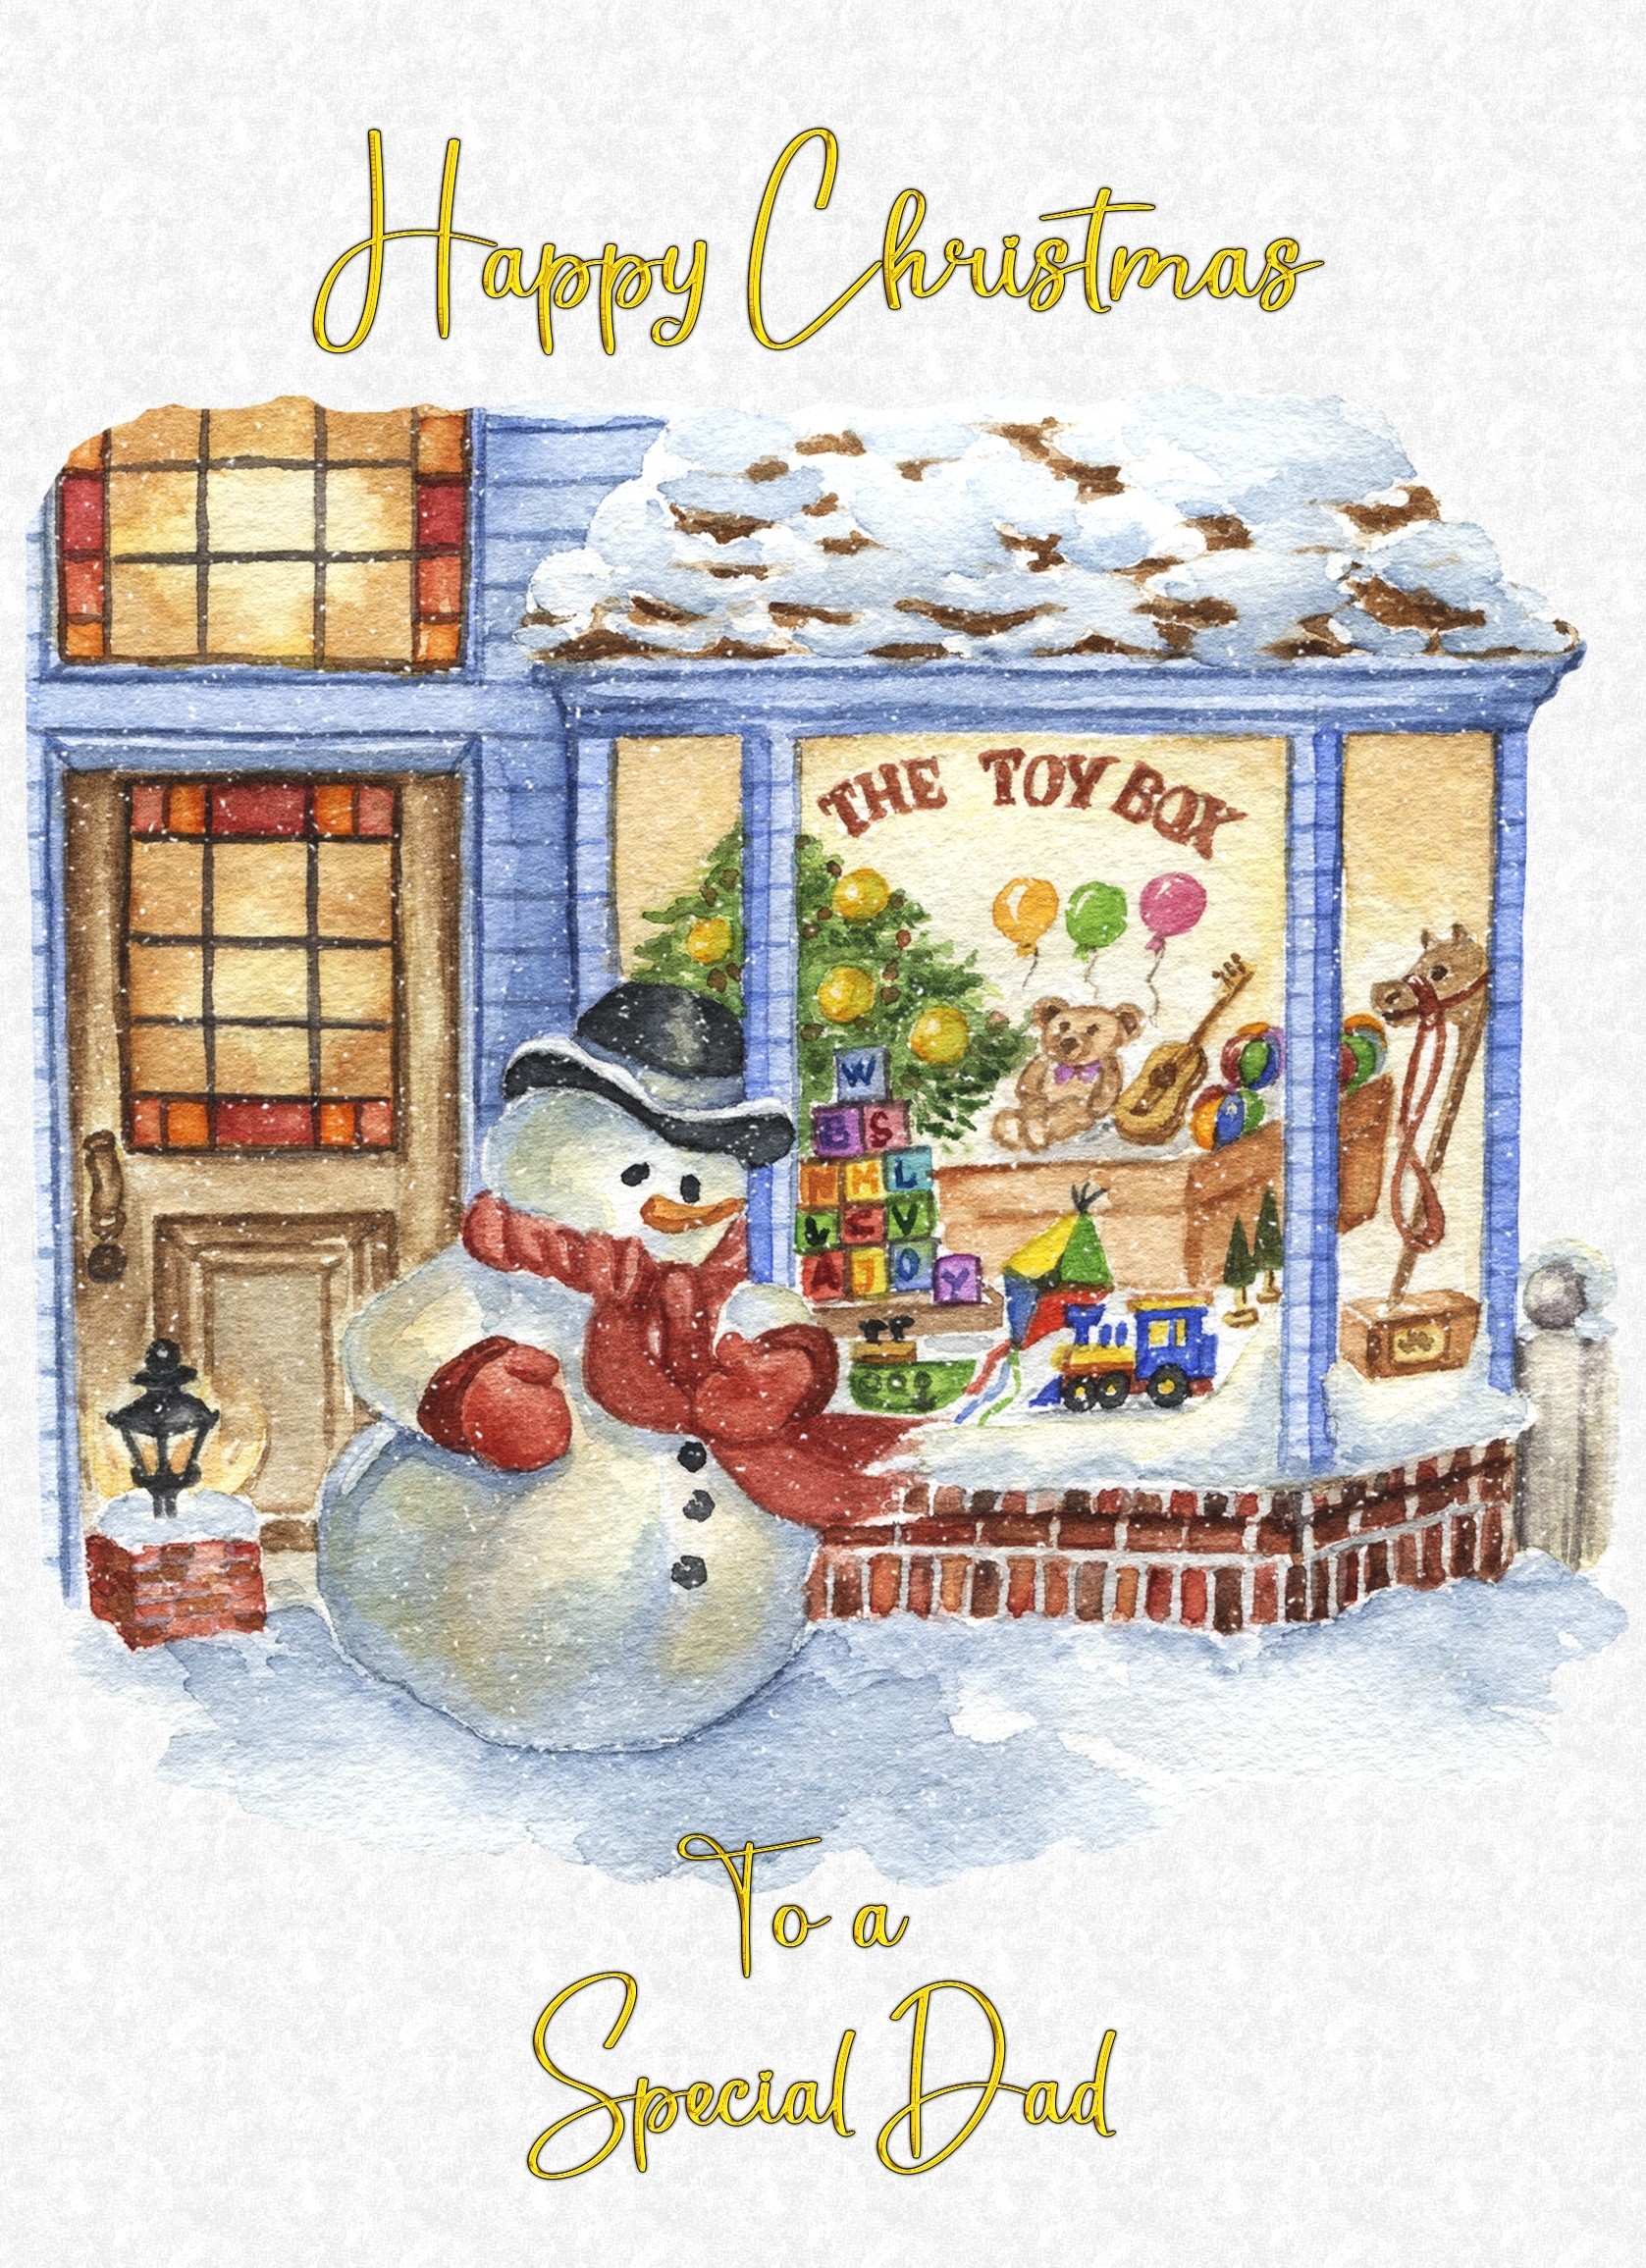 Christmas Card For Dad (White Snowman)